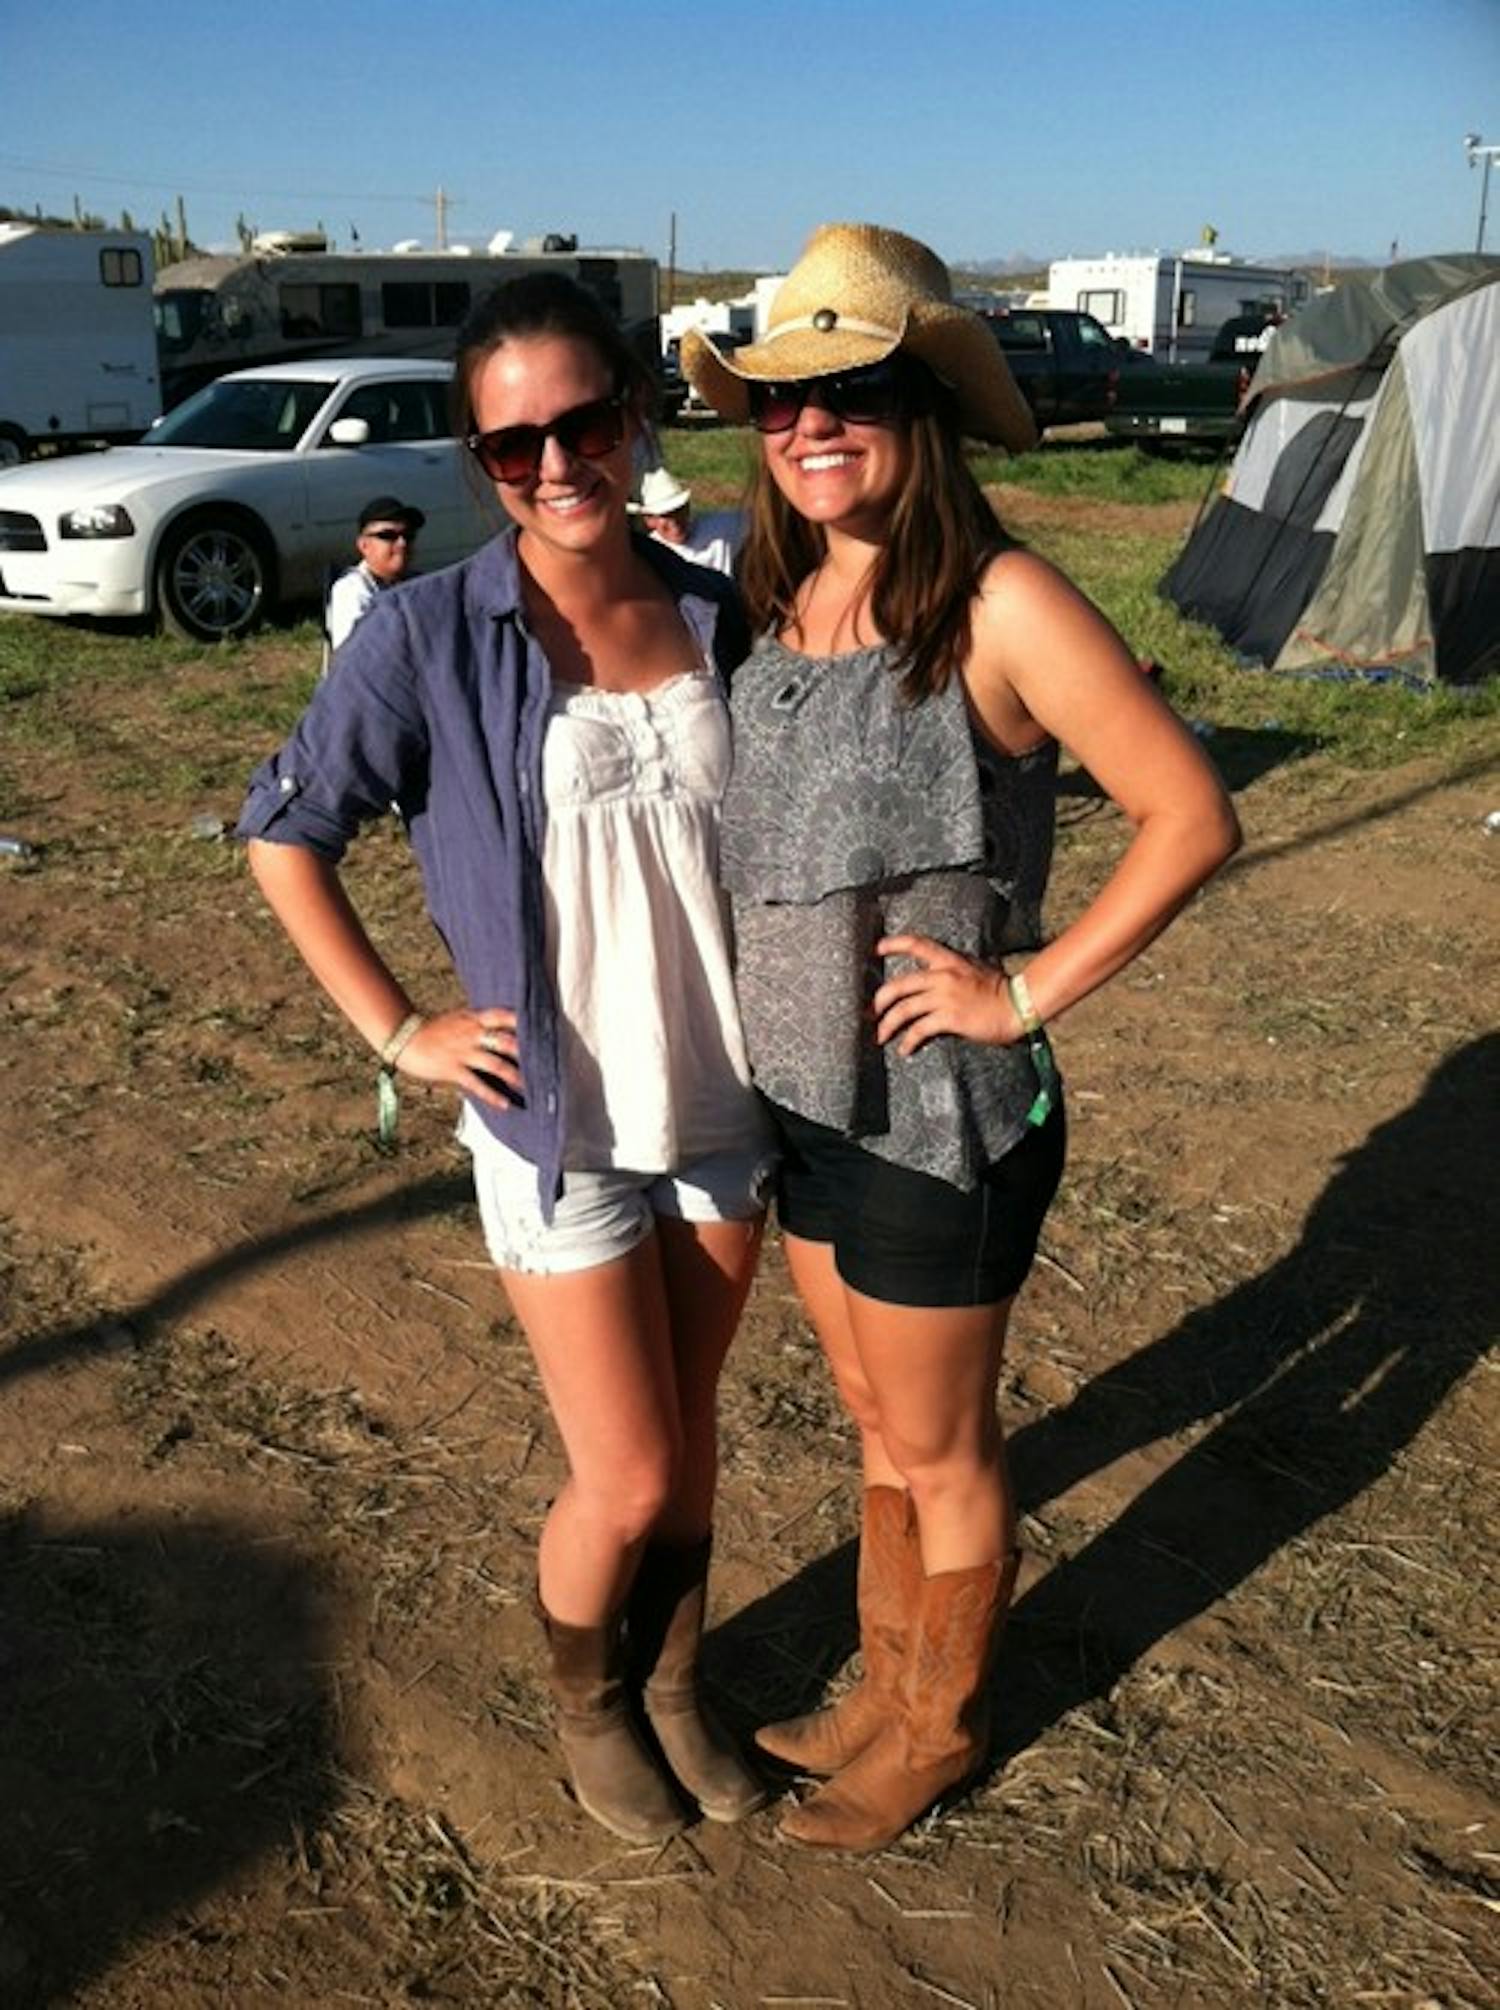 Nicole and Taylor Schwab at Country Thunder. Photo by Nicole Schwab.